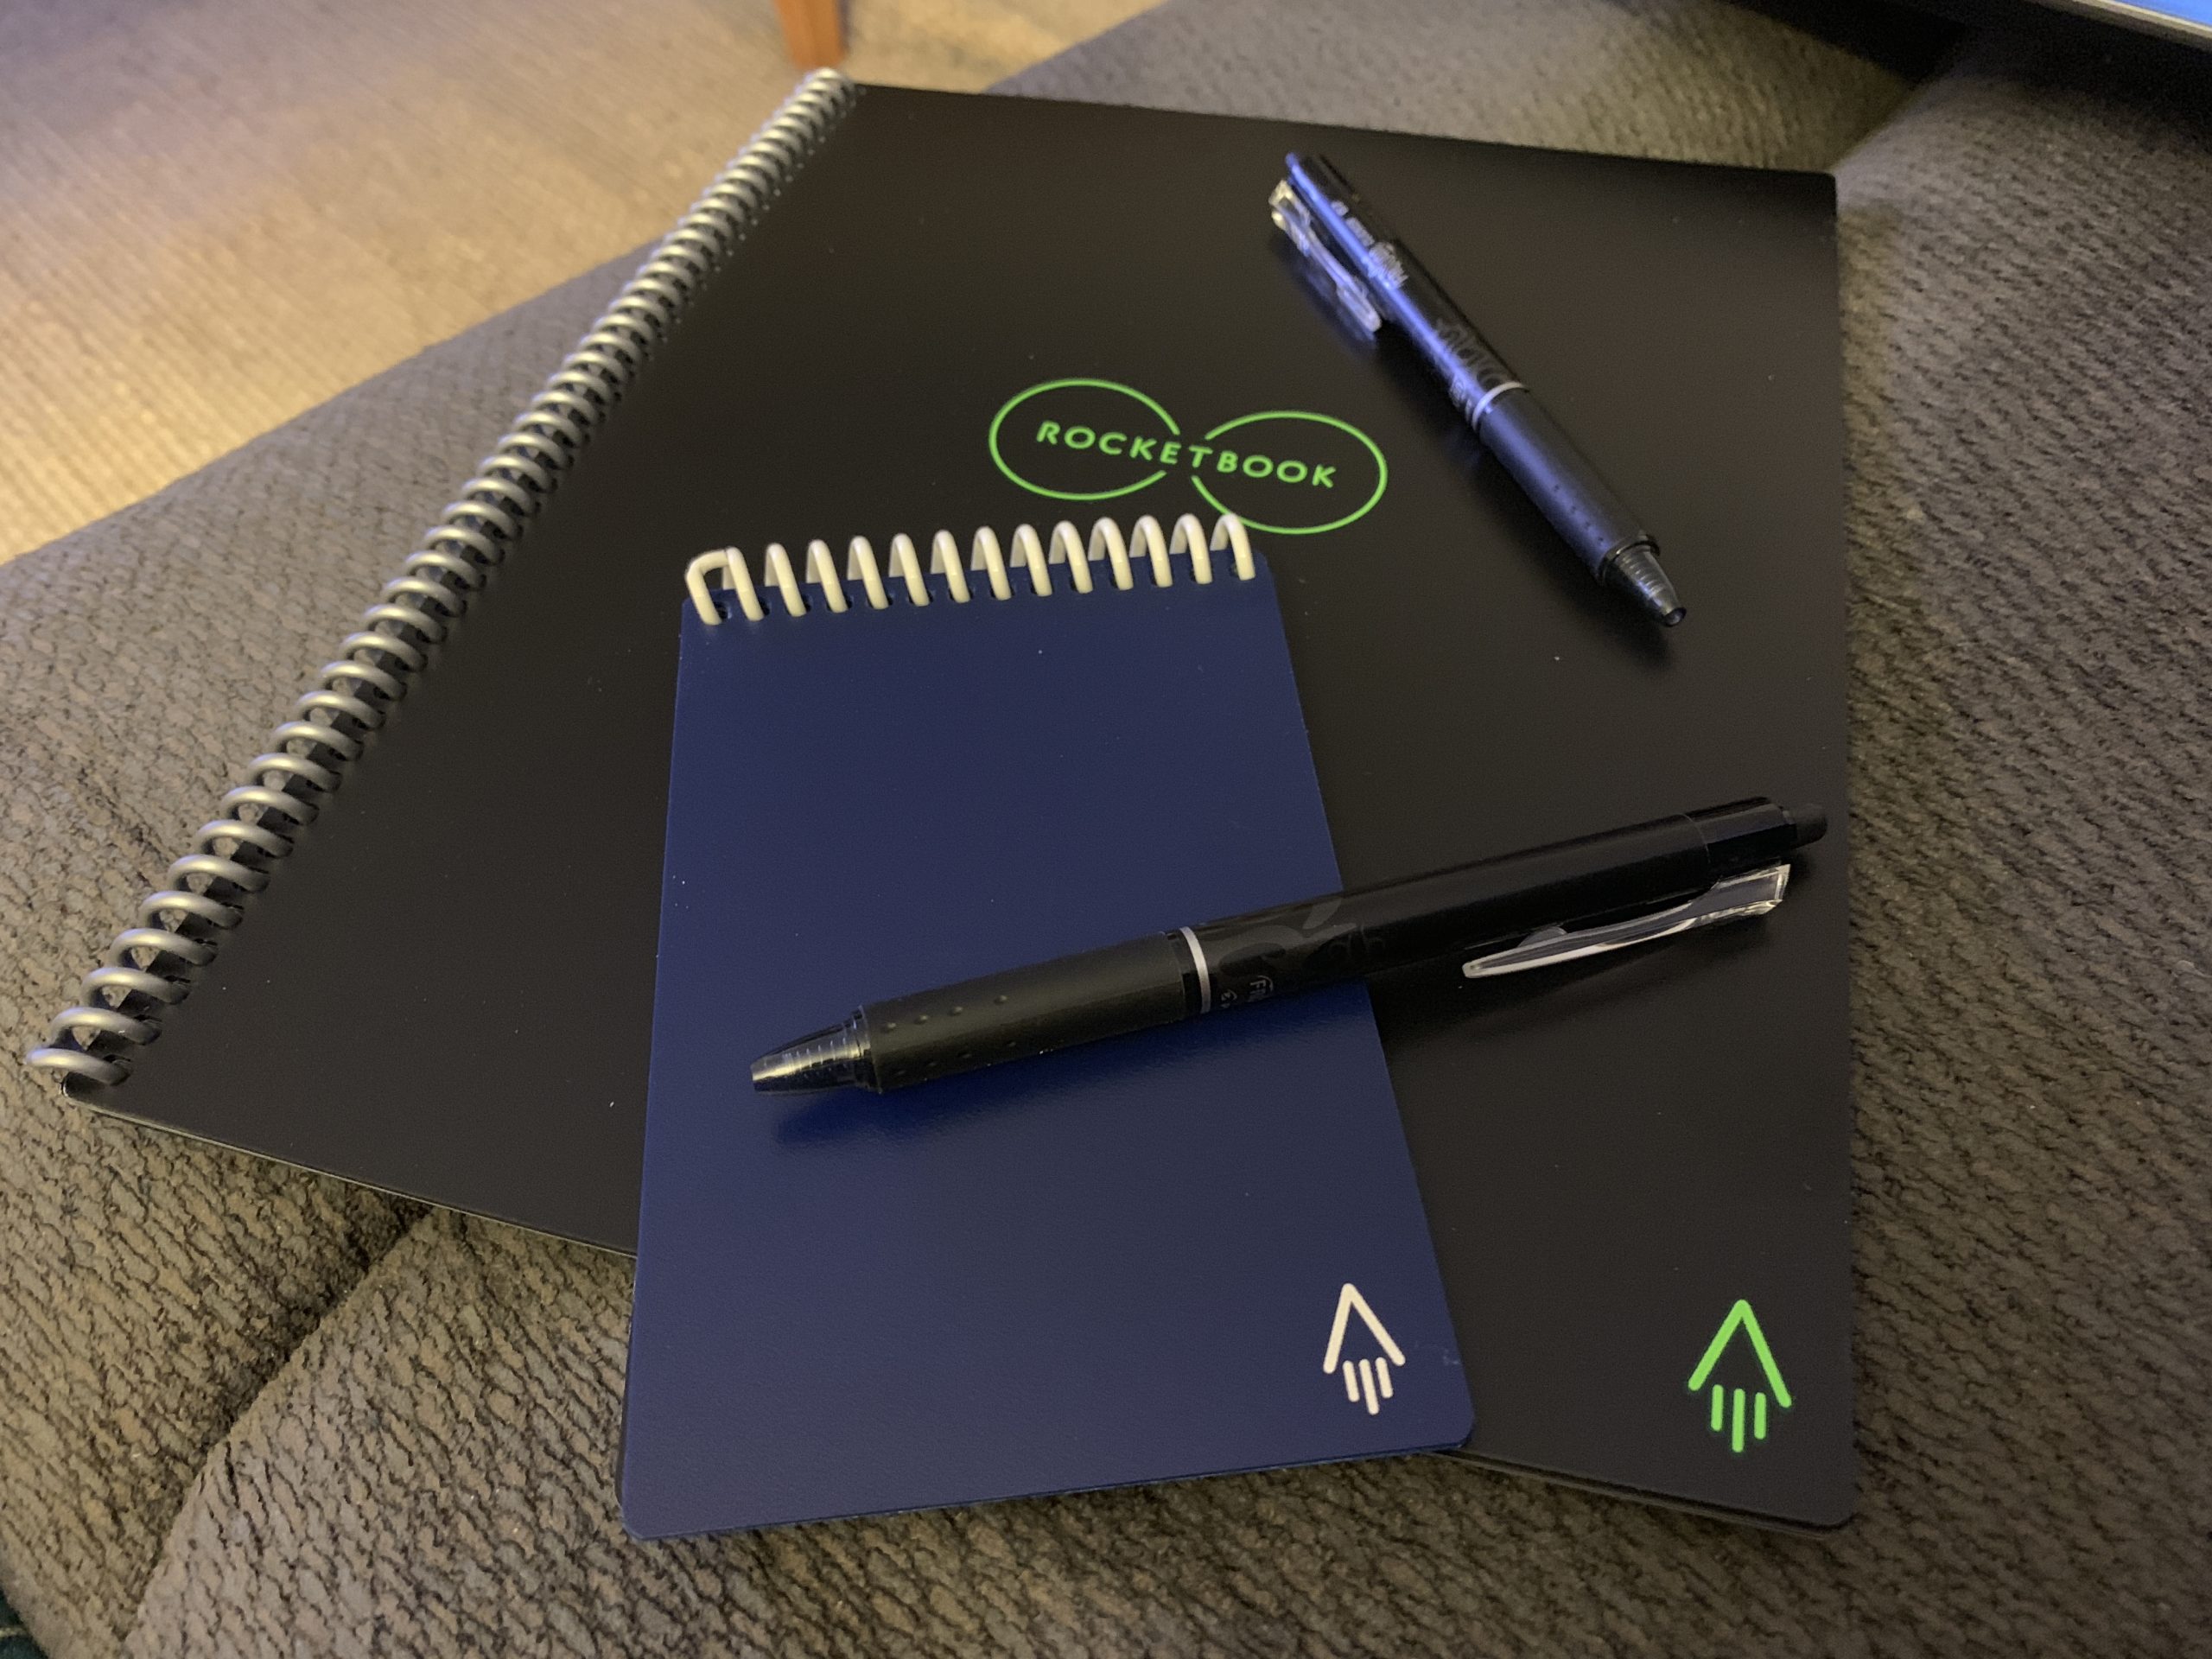 Notebooks: I love testing and experiencing new notebooks and paper